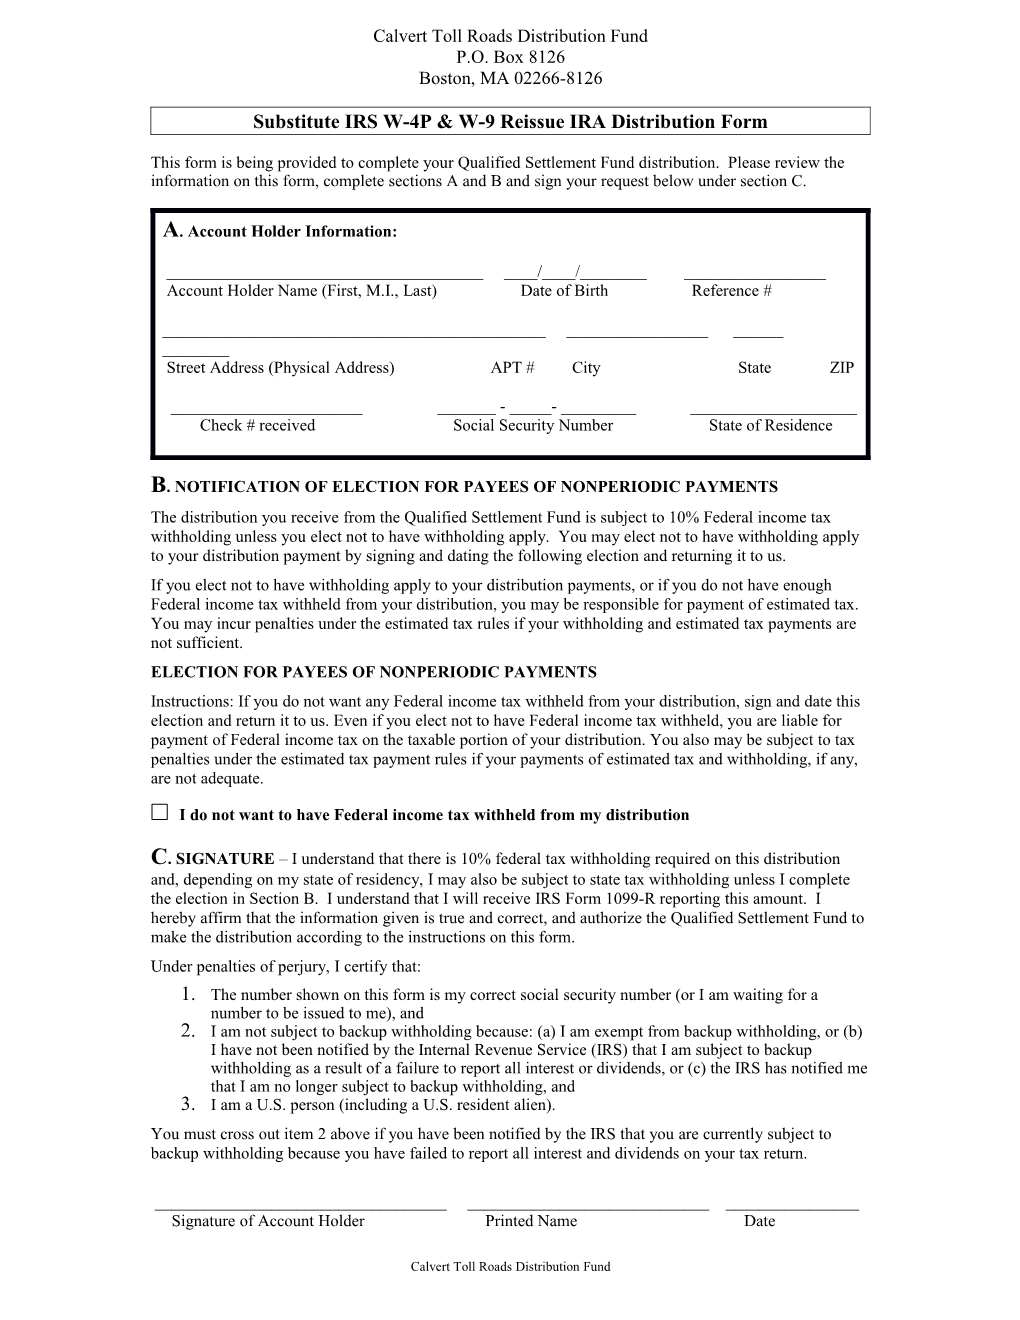 Substitute IRS W-4P & W-9 Reissue IRA Distribution Form